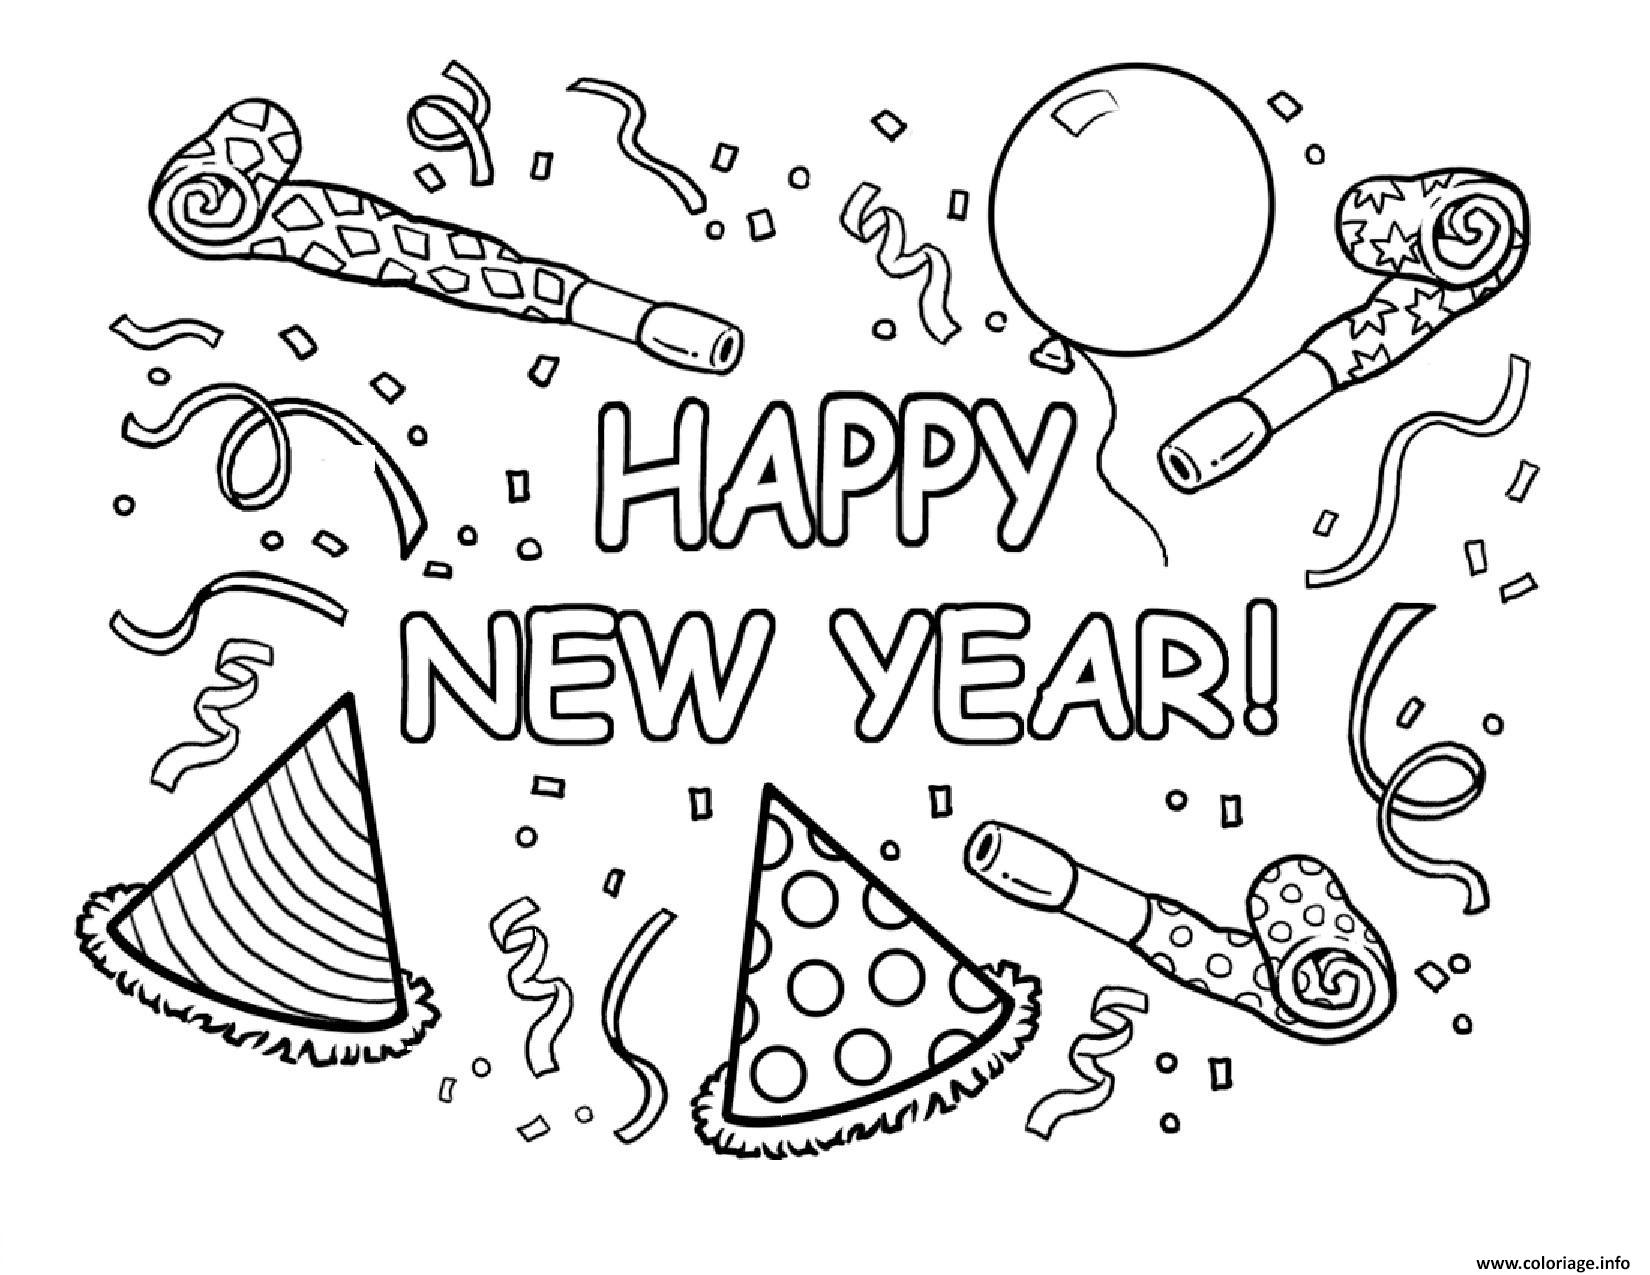 Coloriage Happy New Year Printable  JeColorie.com